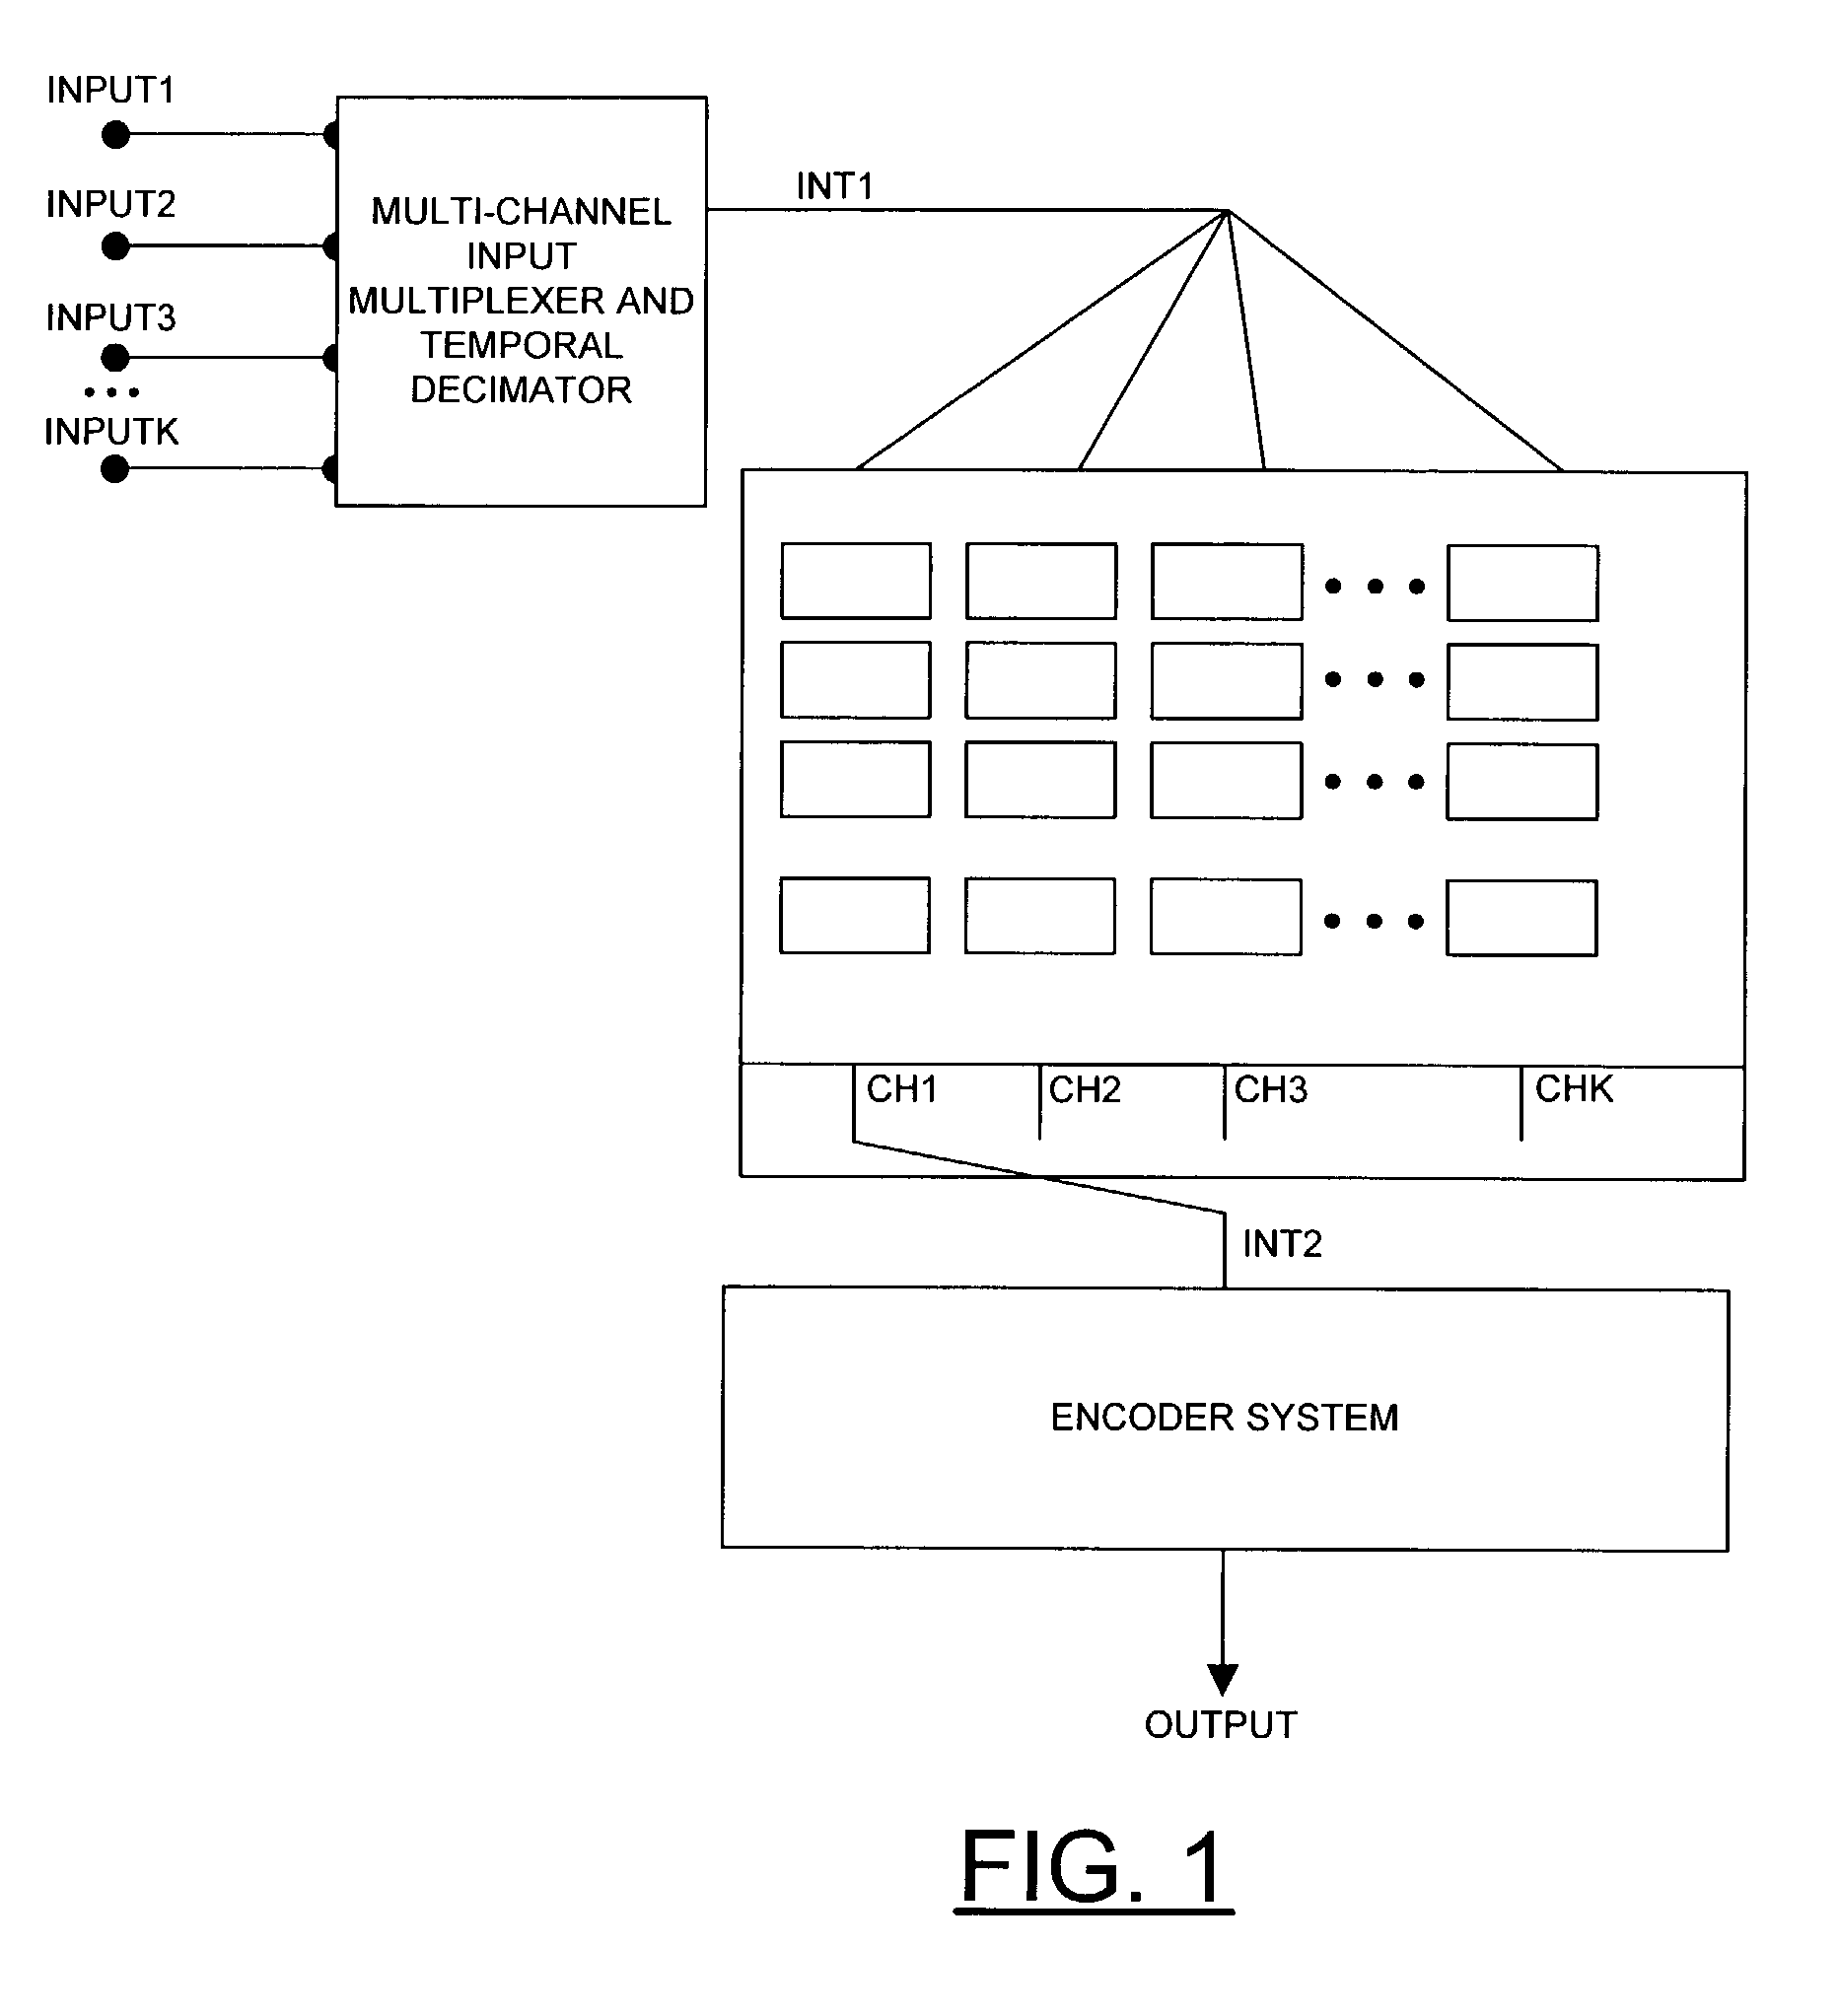 Method and/or apparatus for analyzing the content of a surveillance image